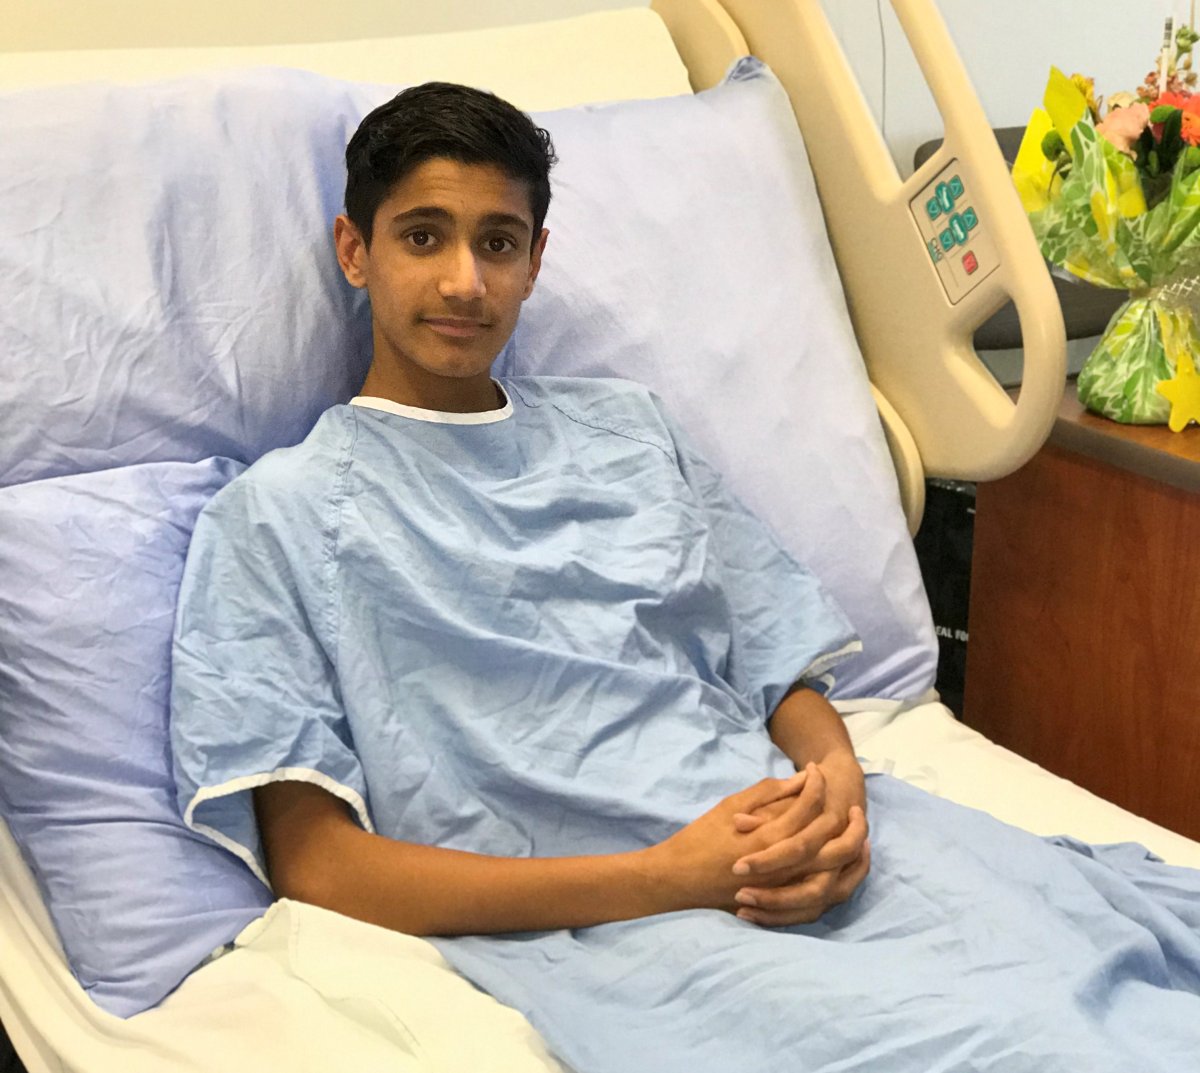 Dilshaan Dhaliwal, seen here, underwent cardiac arrest while at high school last month. Two teachers performed CPR on him, along with using an automated external defibrillator. Dhaliwal was released from hospital this week.